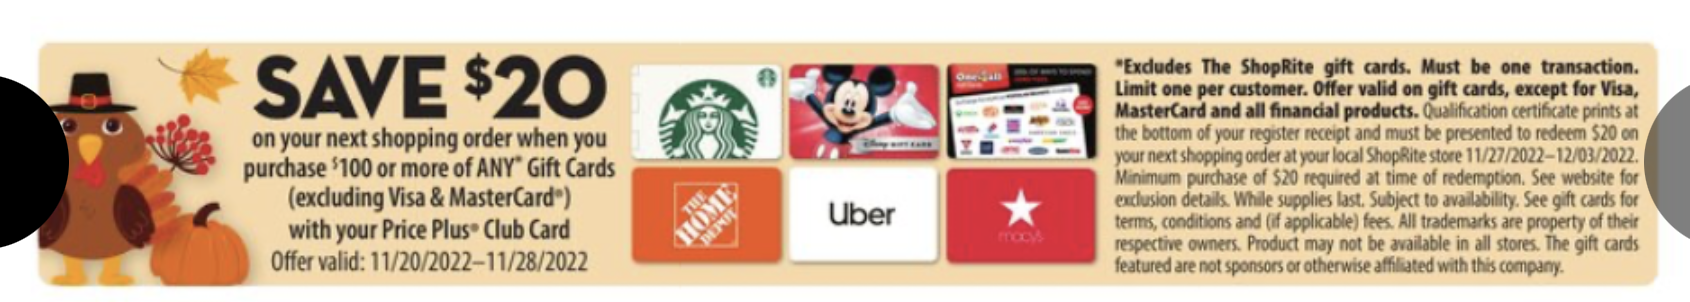 ShopRite (CT, NY, NJ, PA, DE, MD): Spend $100 on gift cards, get $20 for next trip